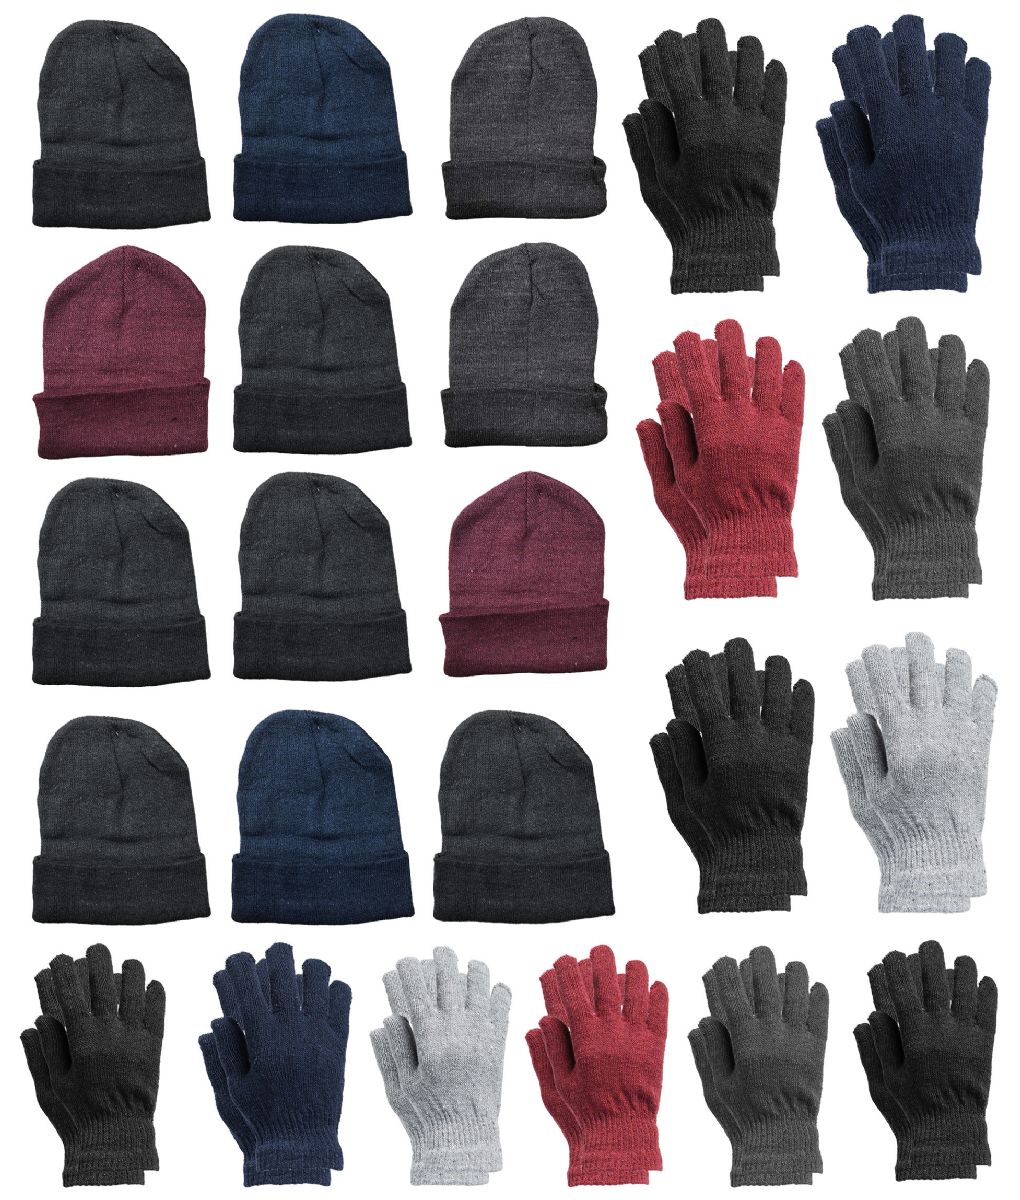 12 sets of Yacht & Smith Unisex Assorted Colored Winter Hat & Glove Set